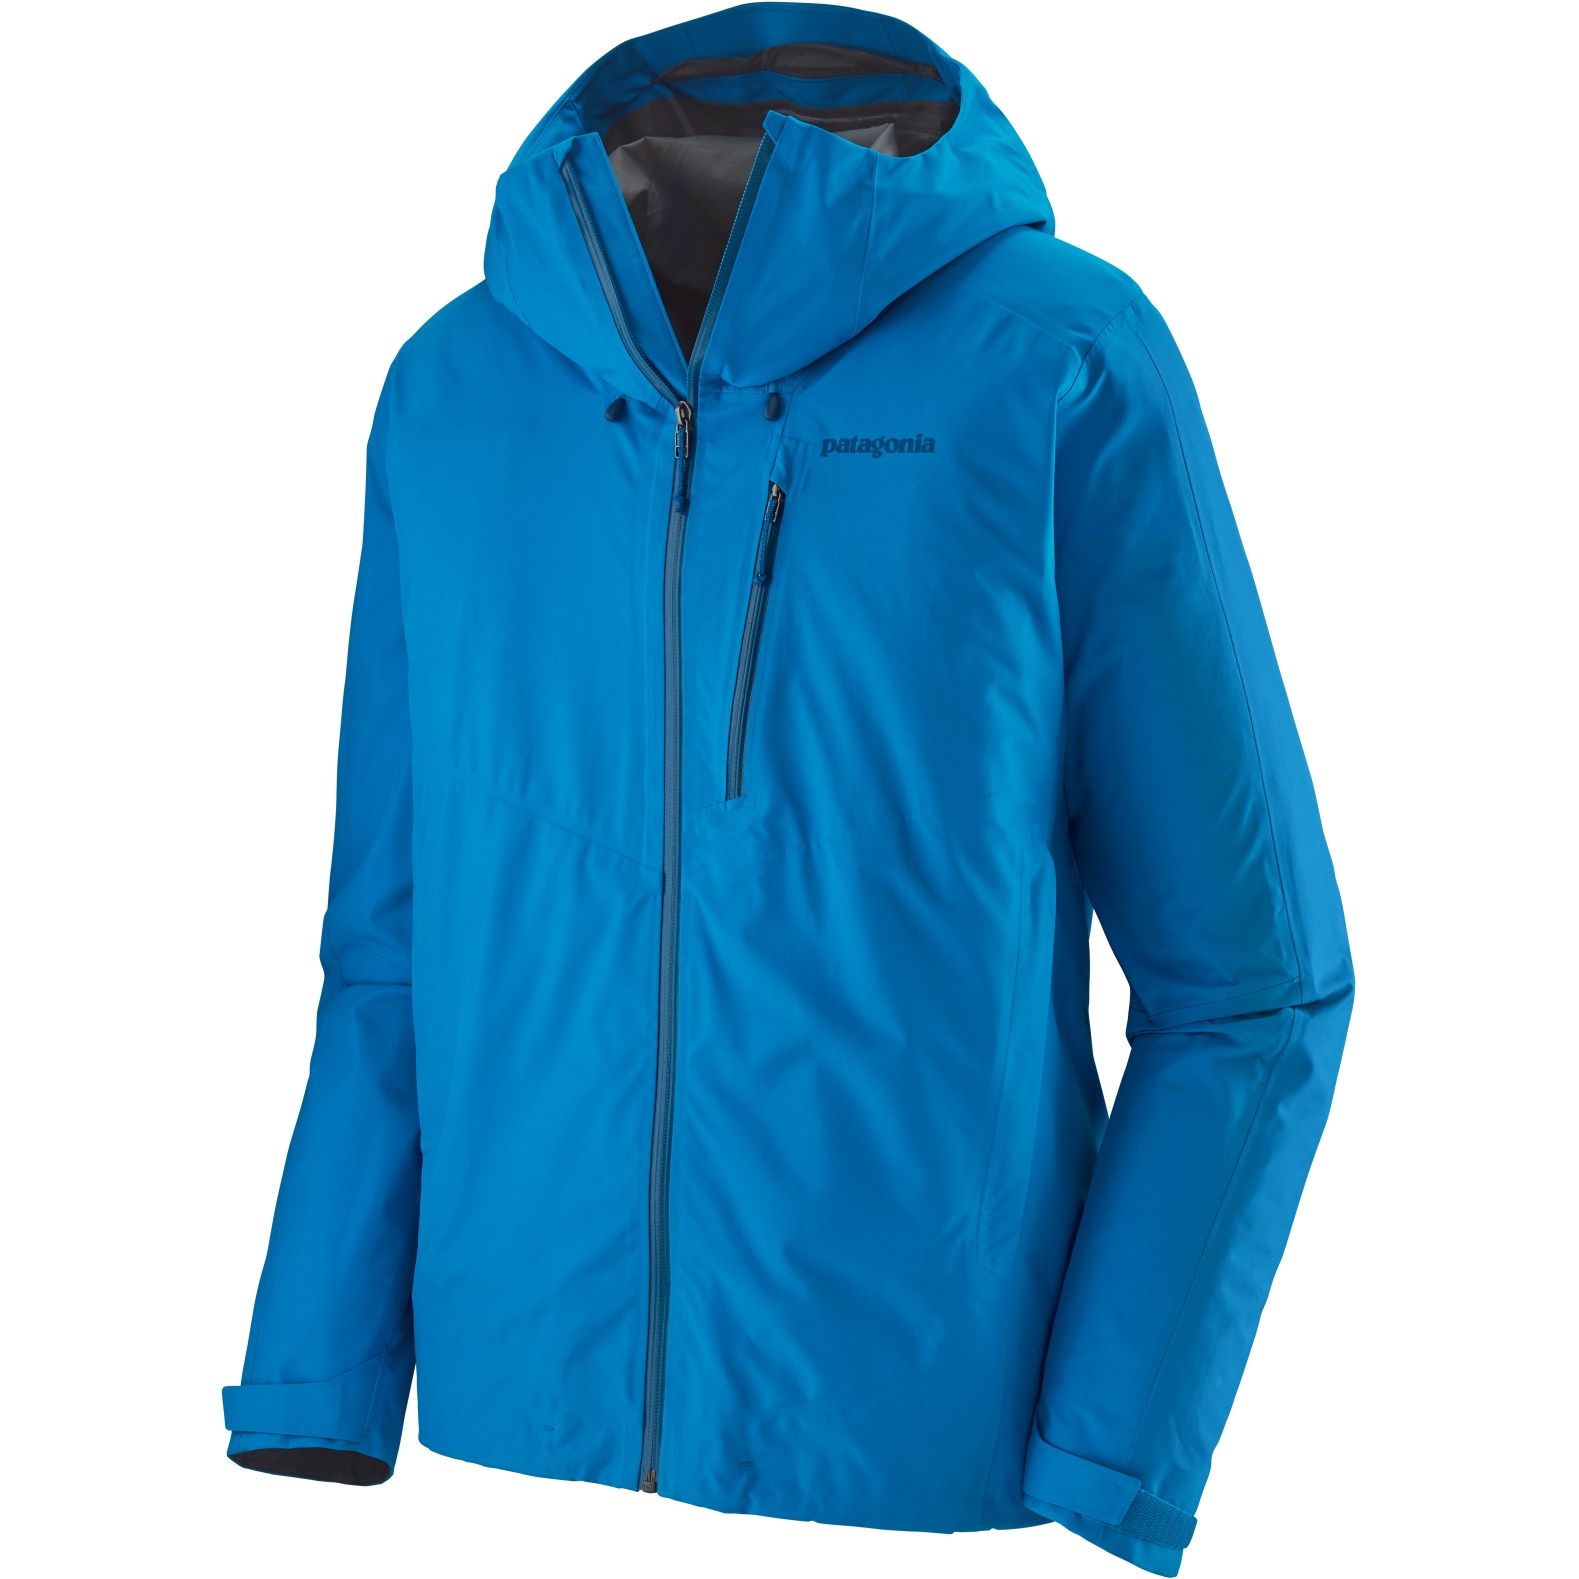 Patagonia M's Calcite Jacket - Andes Blue - XXL